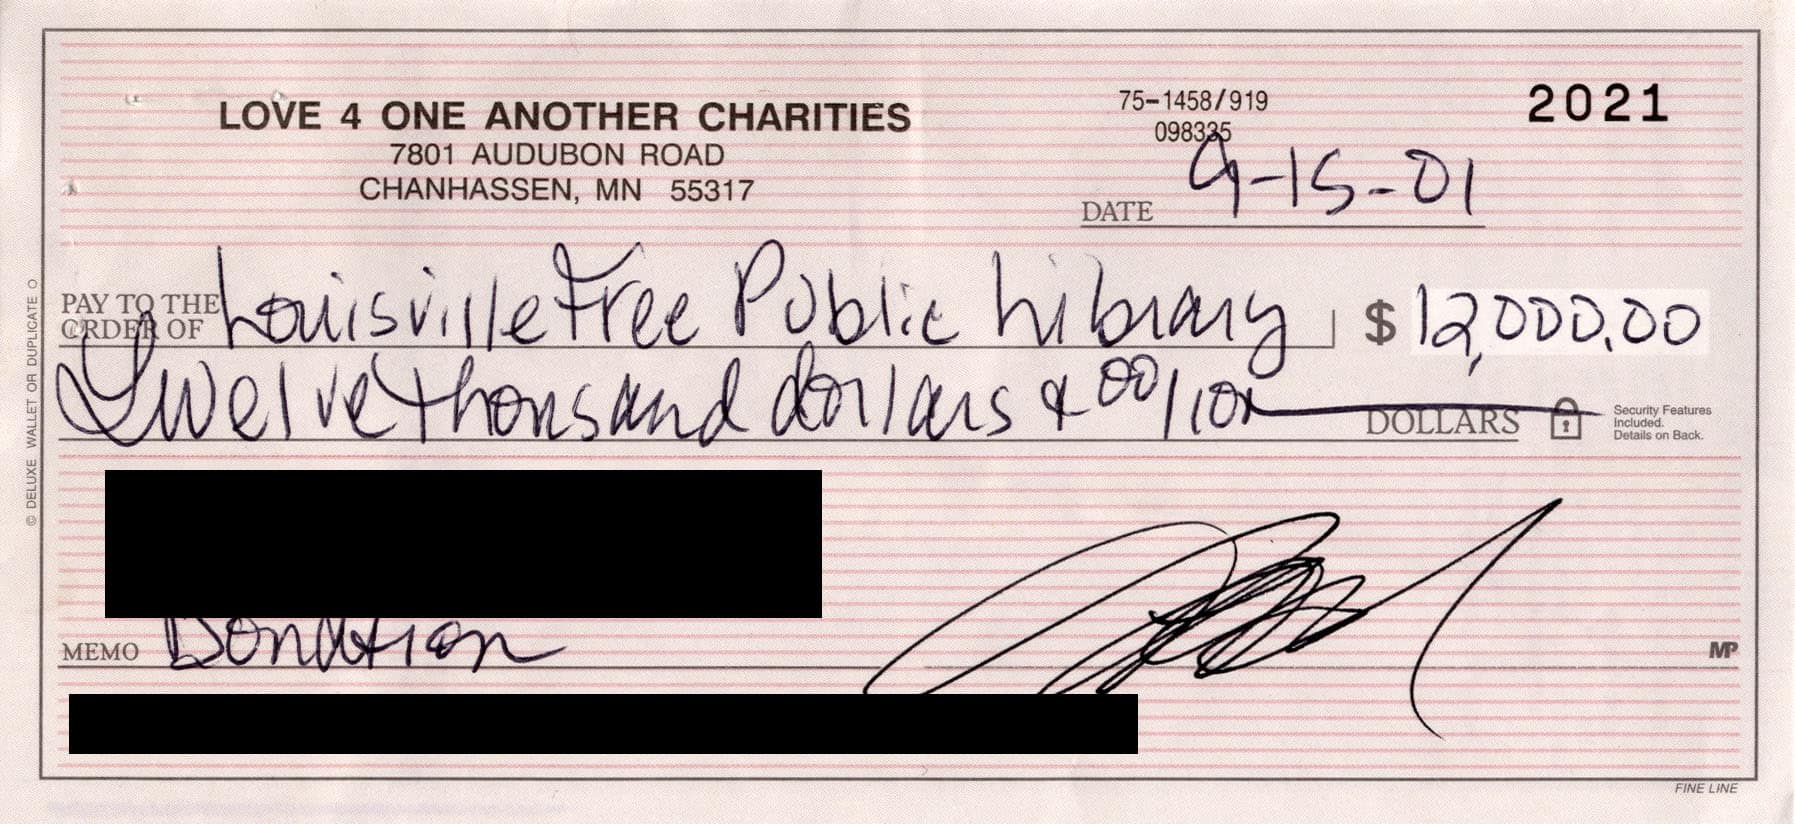 Check from Prince's Foundation for the Western Library